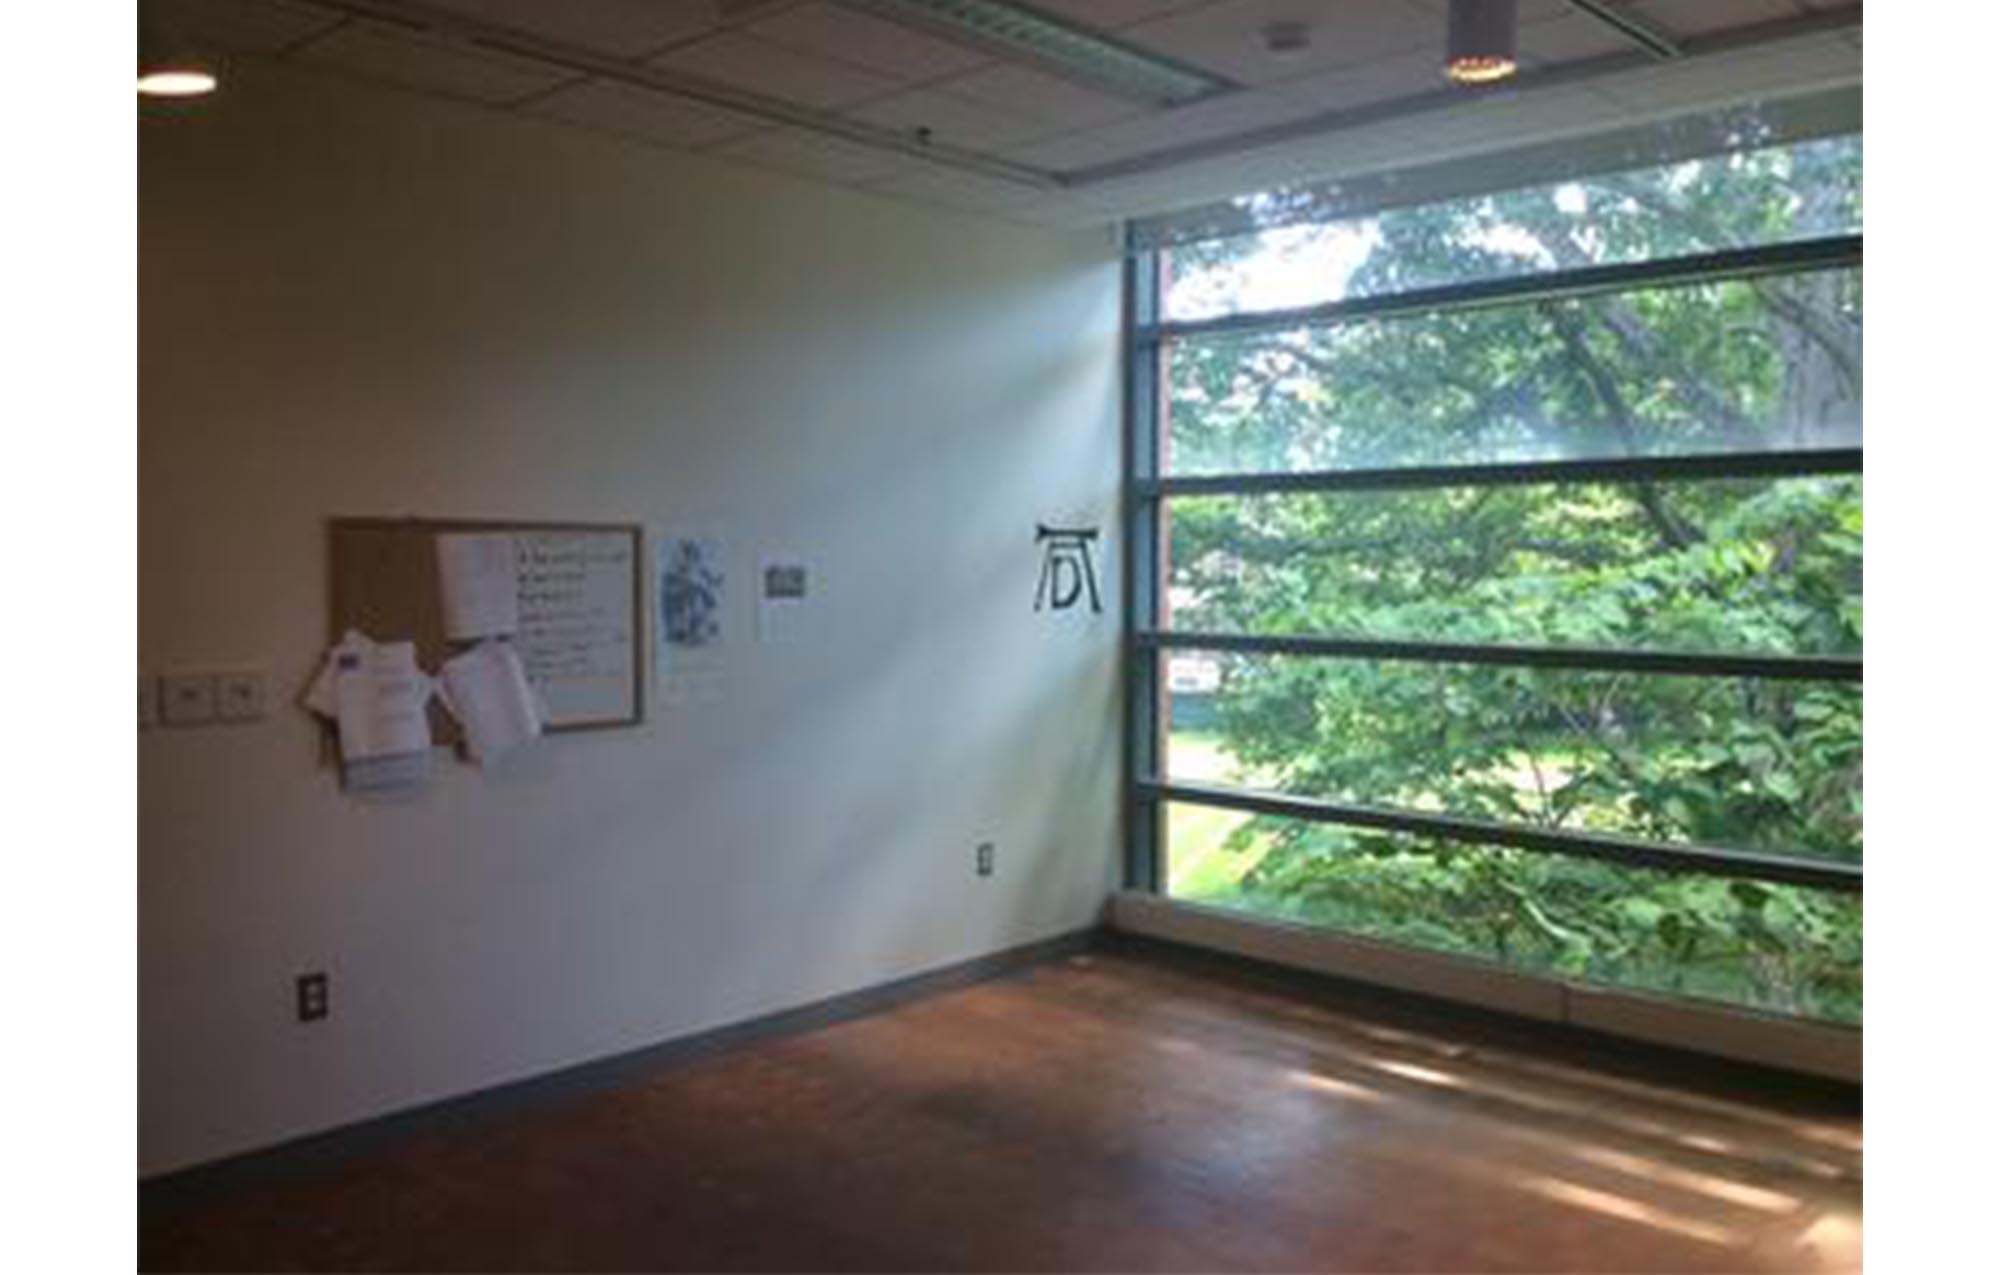 empty room with wood floors. back left wall is plain white and has a whiteboard and cork board on it. back right wall has floor-to-ceiling windows showing green trees outside